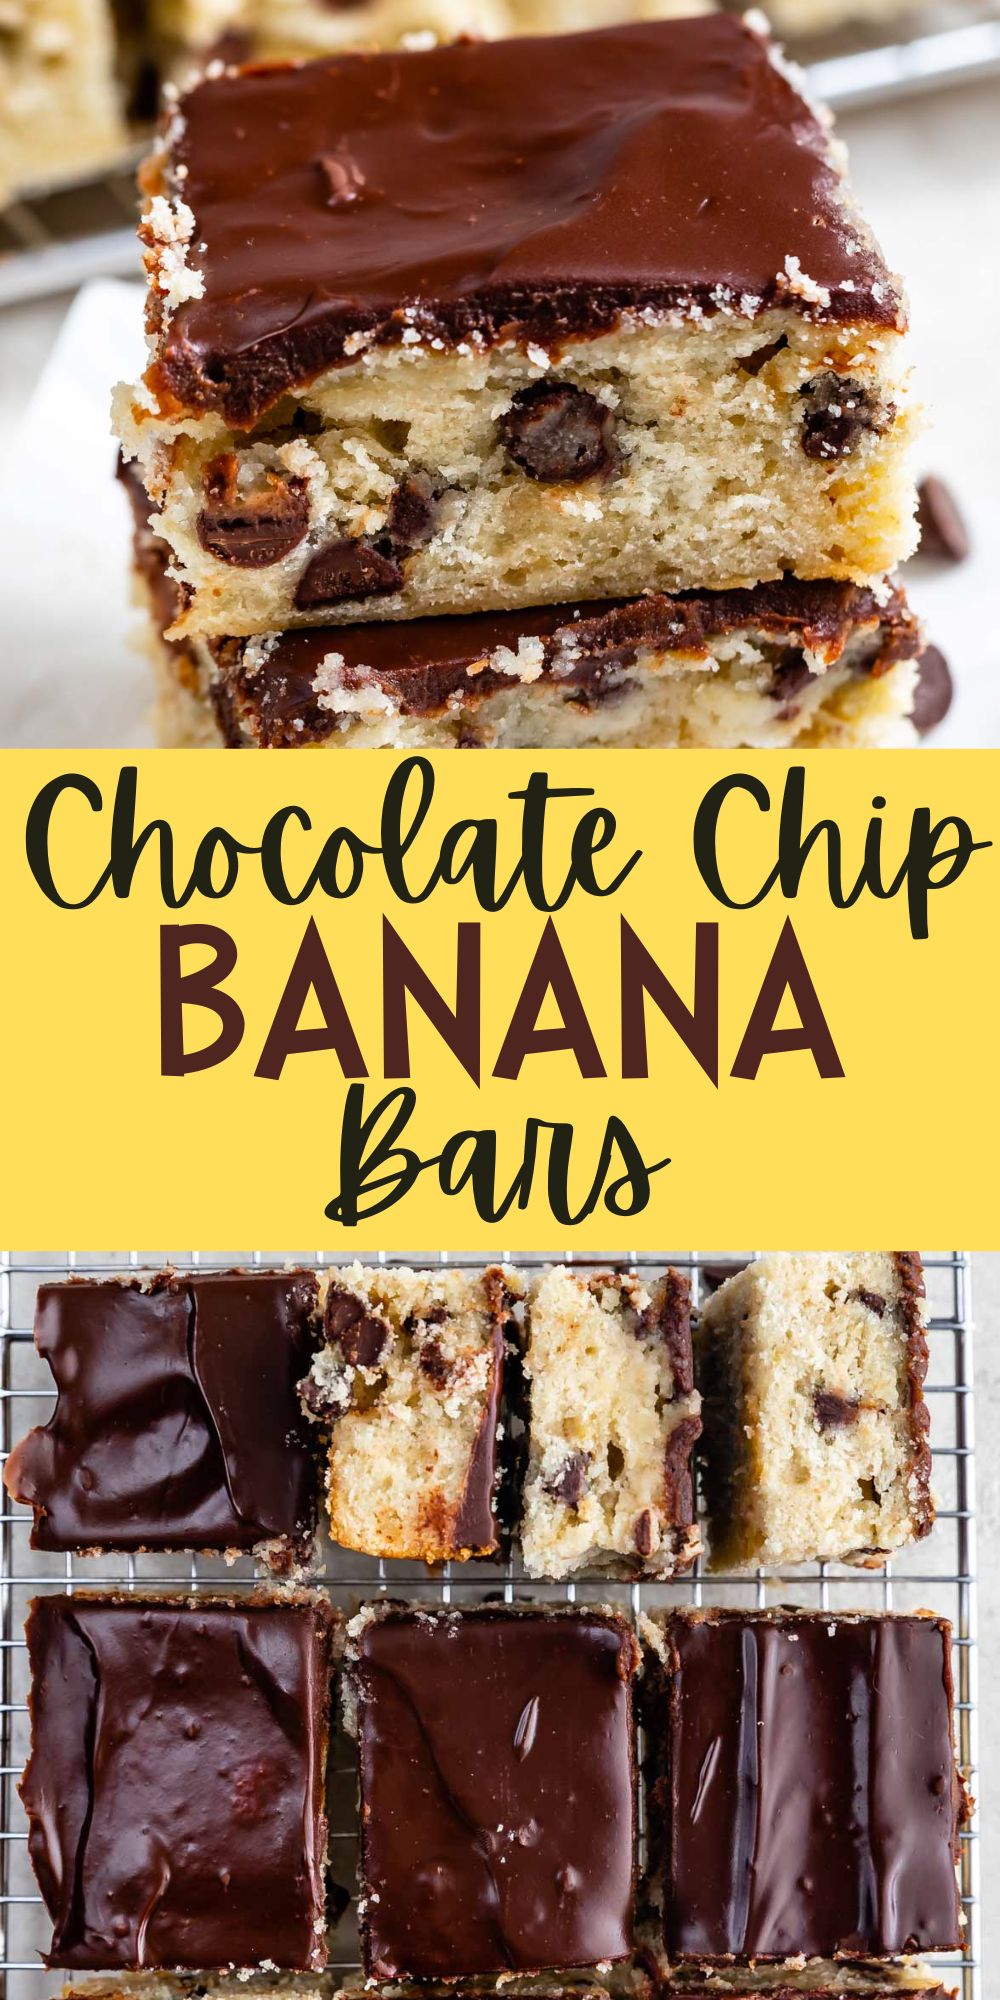 two photos of stacked banana bars with chocolate chips baked in with words on the image.